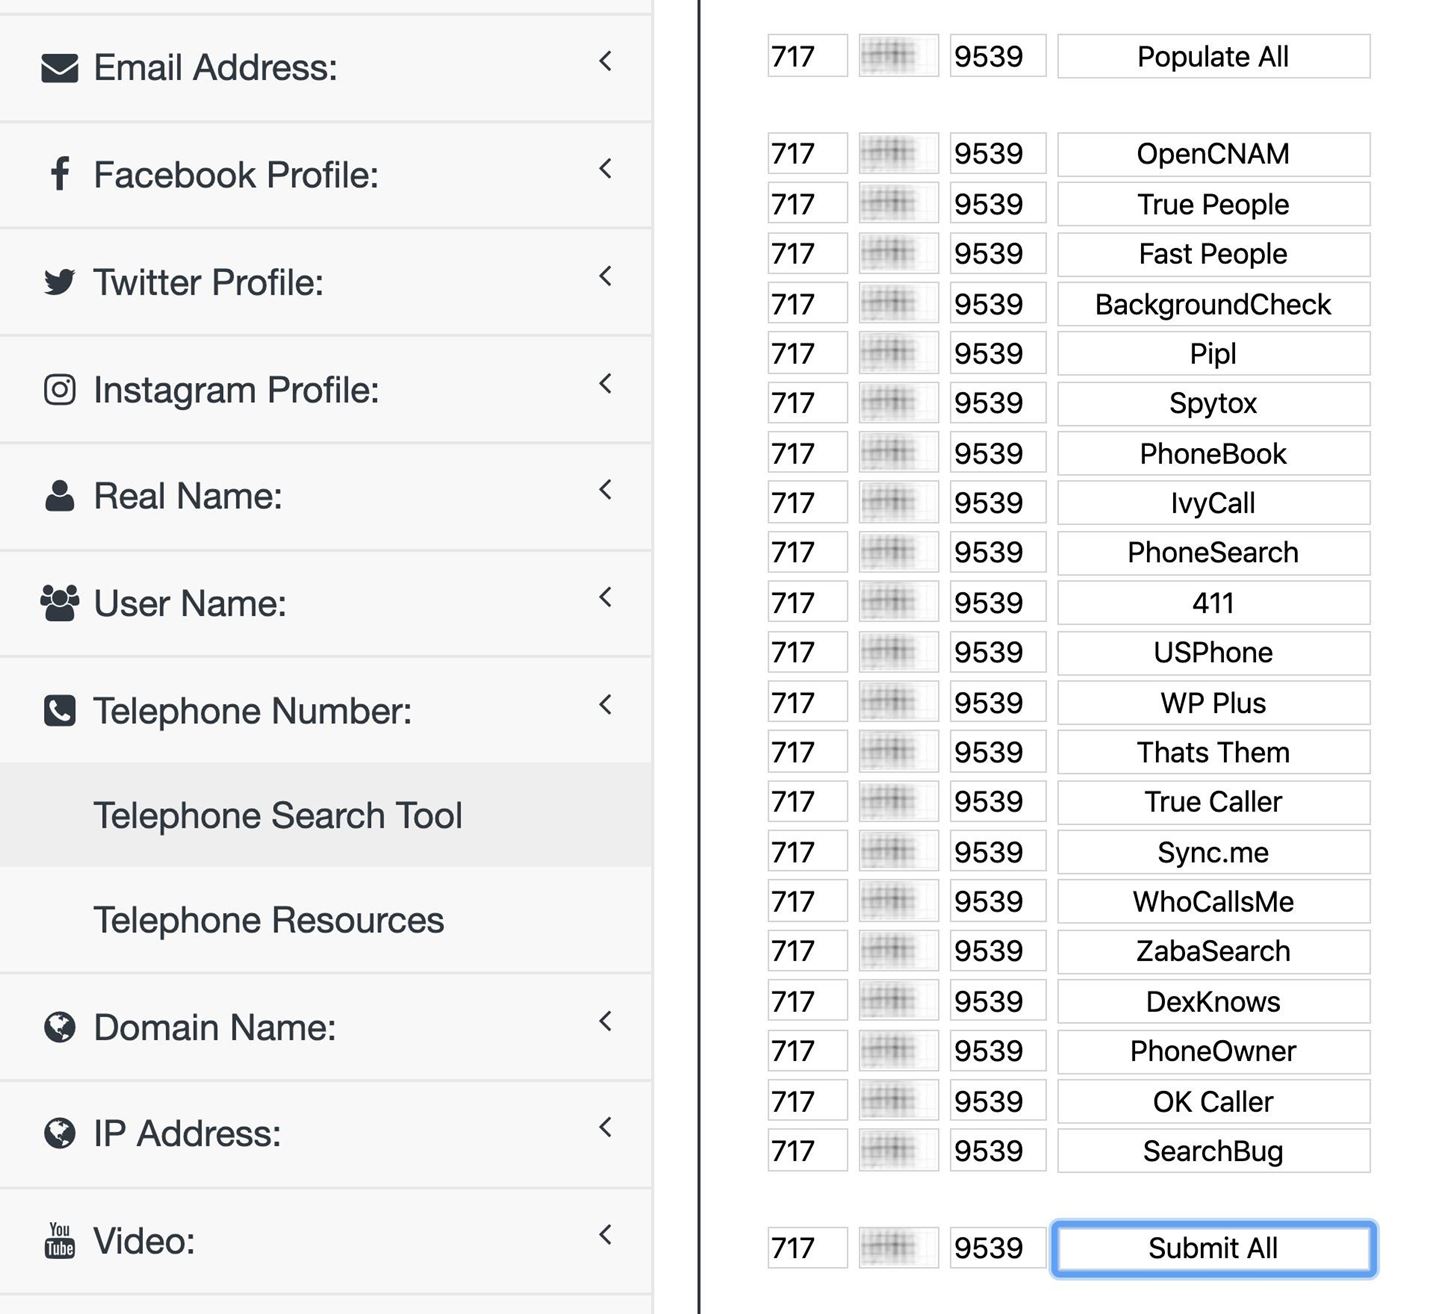 How to Find Identifying Information from a Phone Number Using OSINT Tools